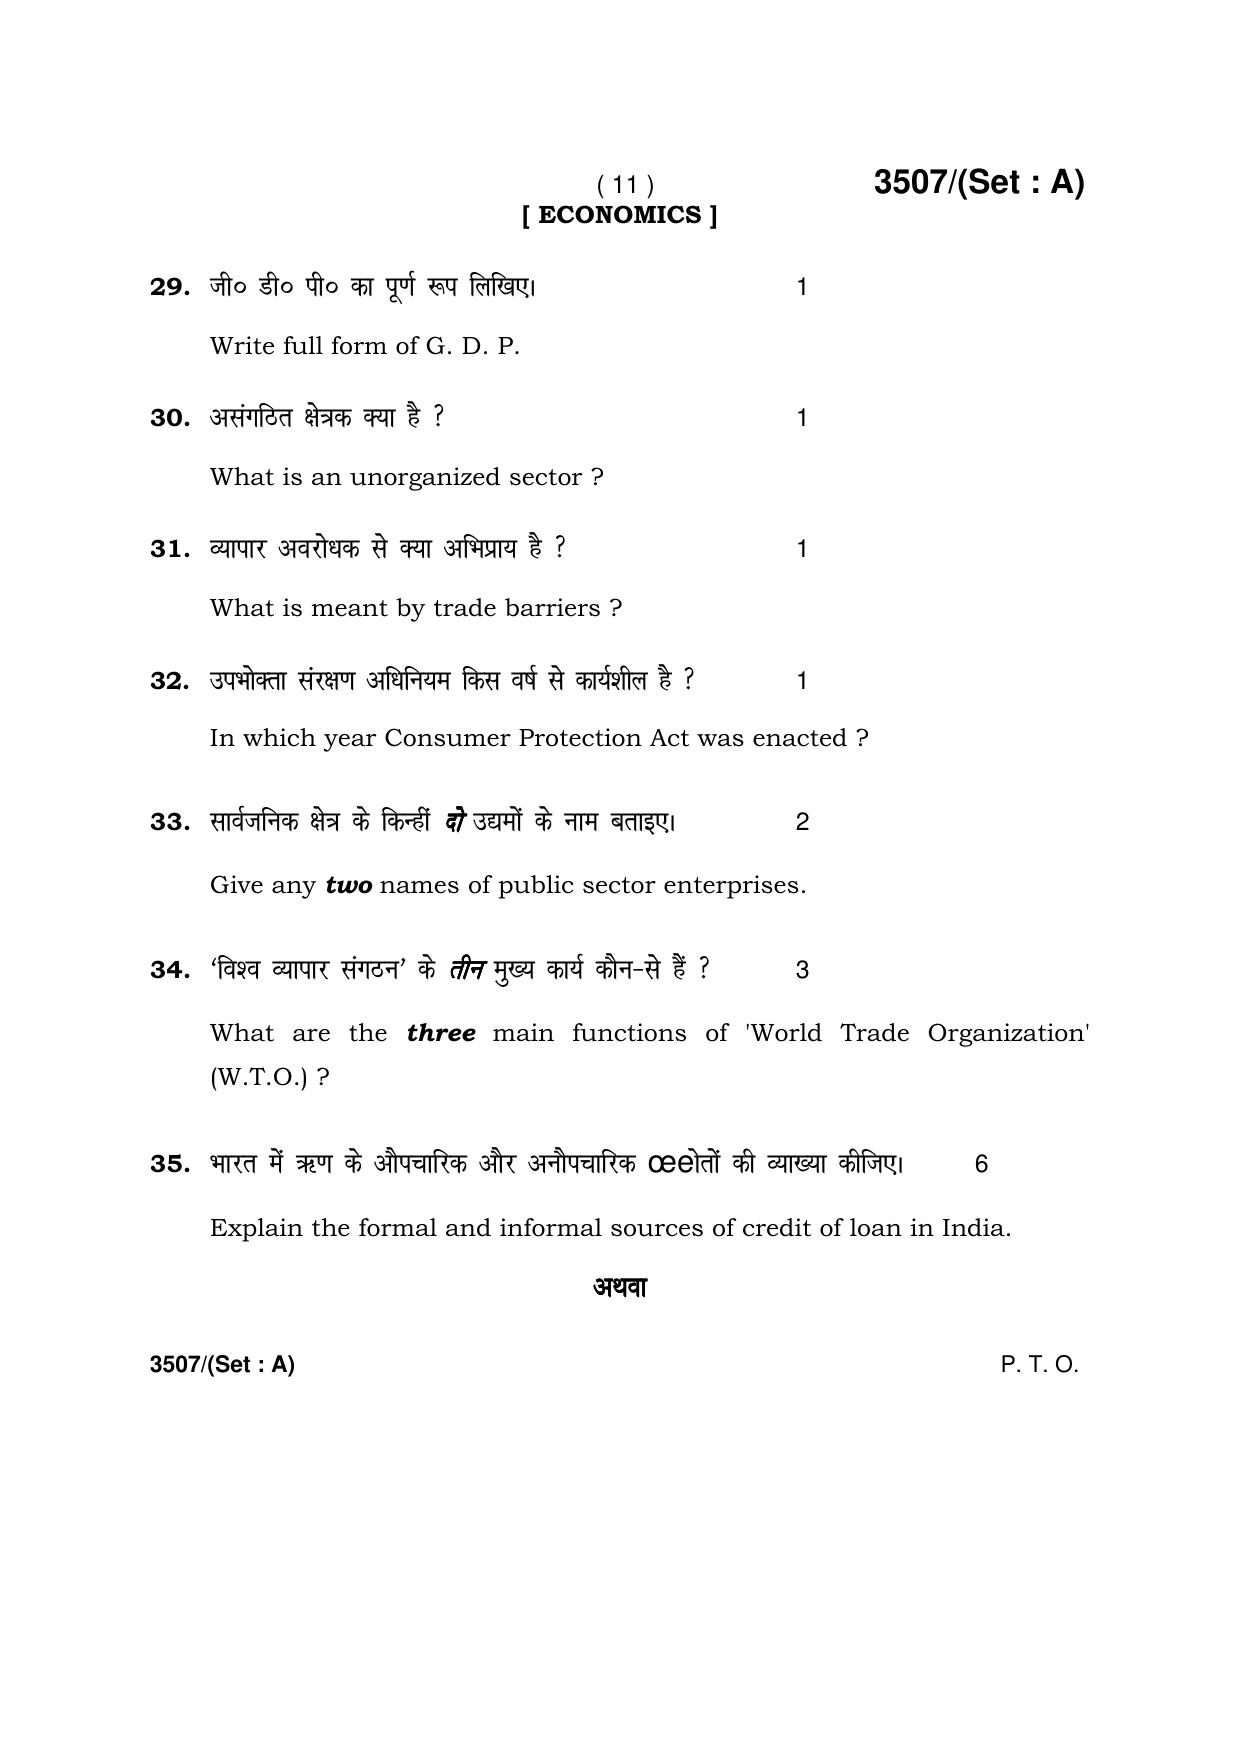 Haryana Board HBSE Class 10 Social Science -A 2018 Question Paper - Page 11